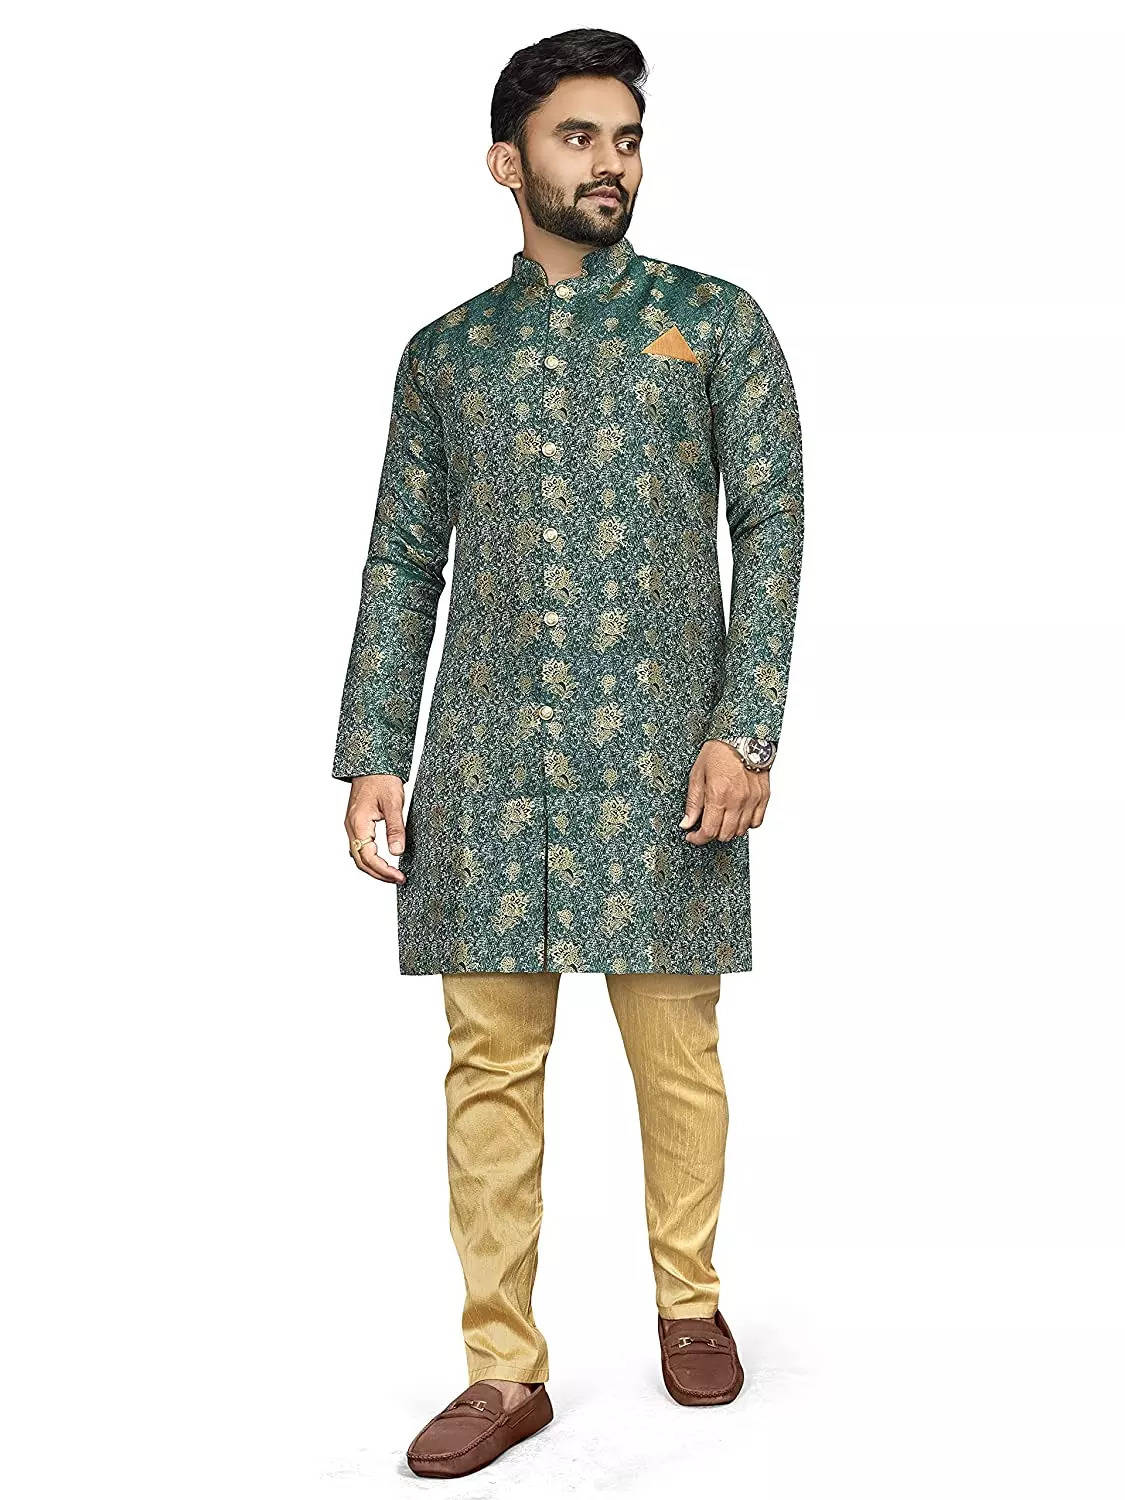 Best Indo Western Fusion Dresses to Buy Online – Mabish Store